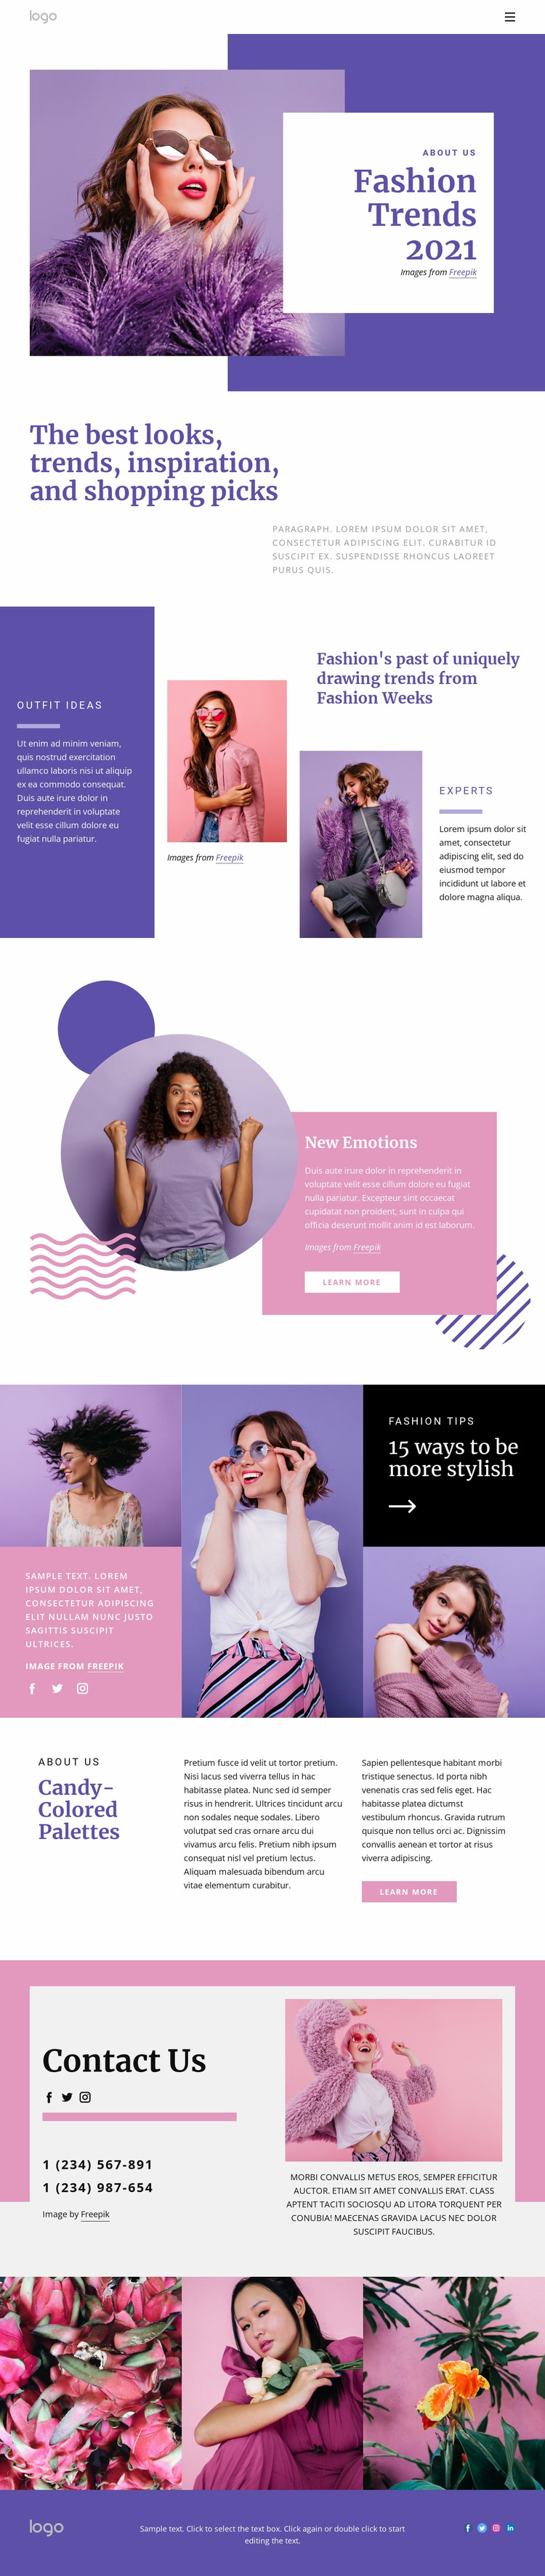 Get the hottest styles Website Mockup